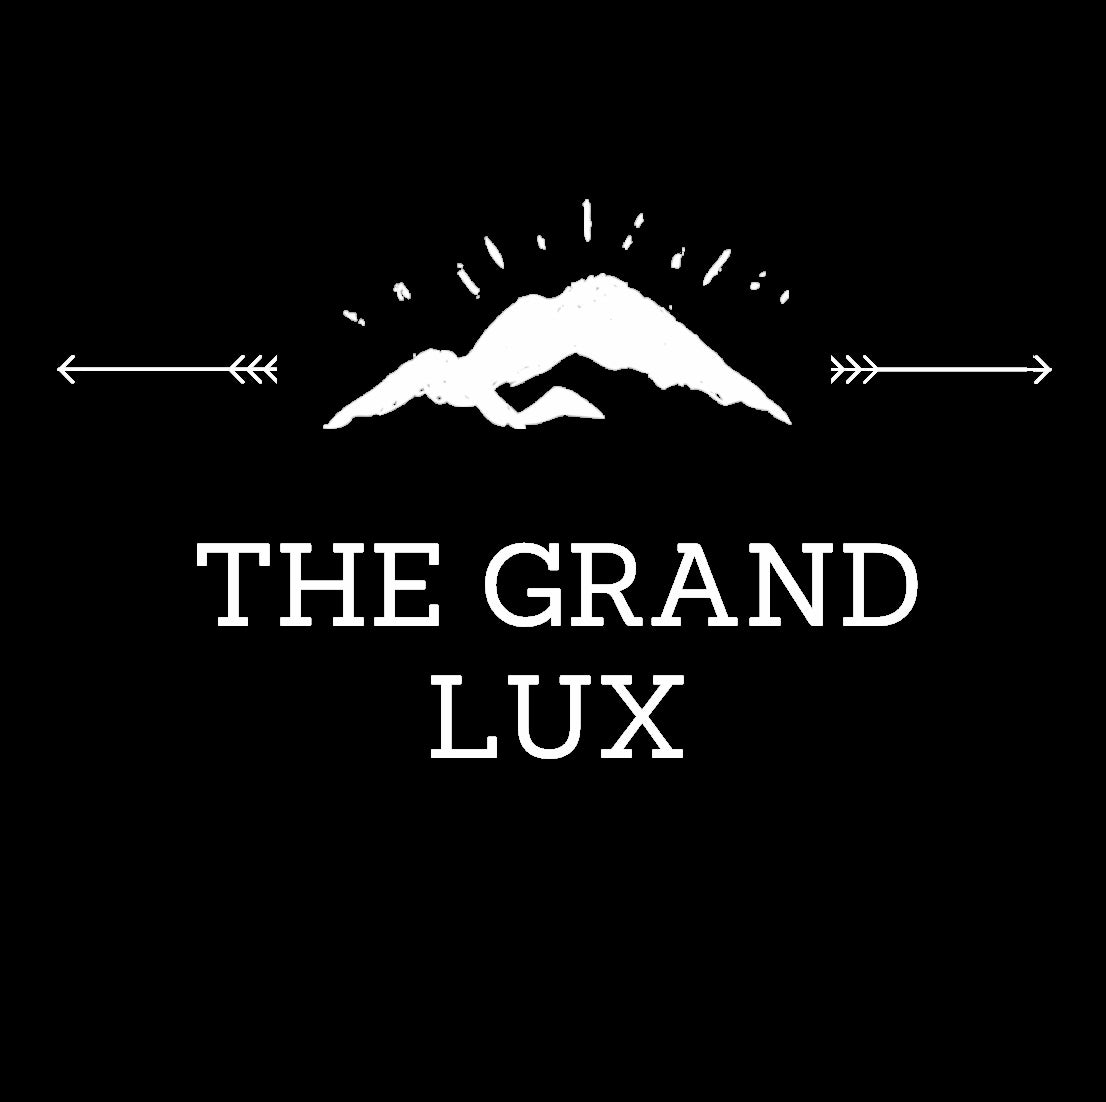 The Grand Lux